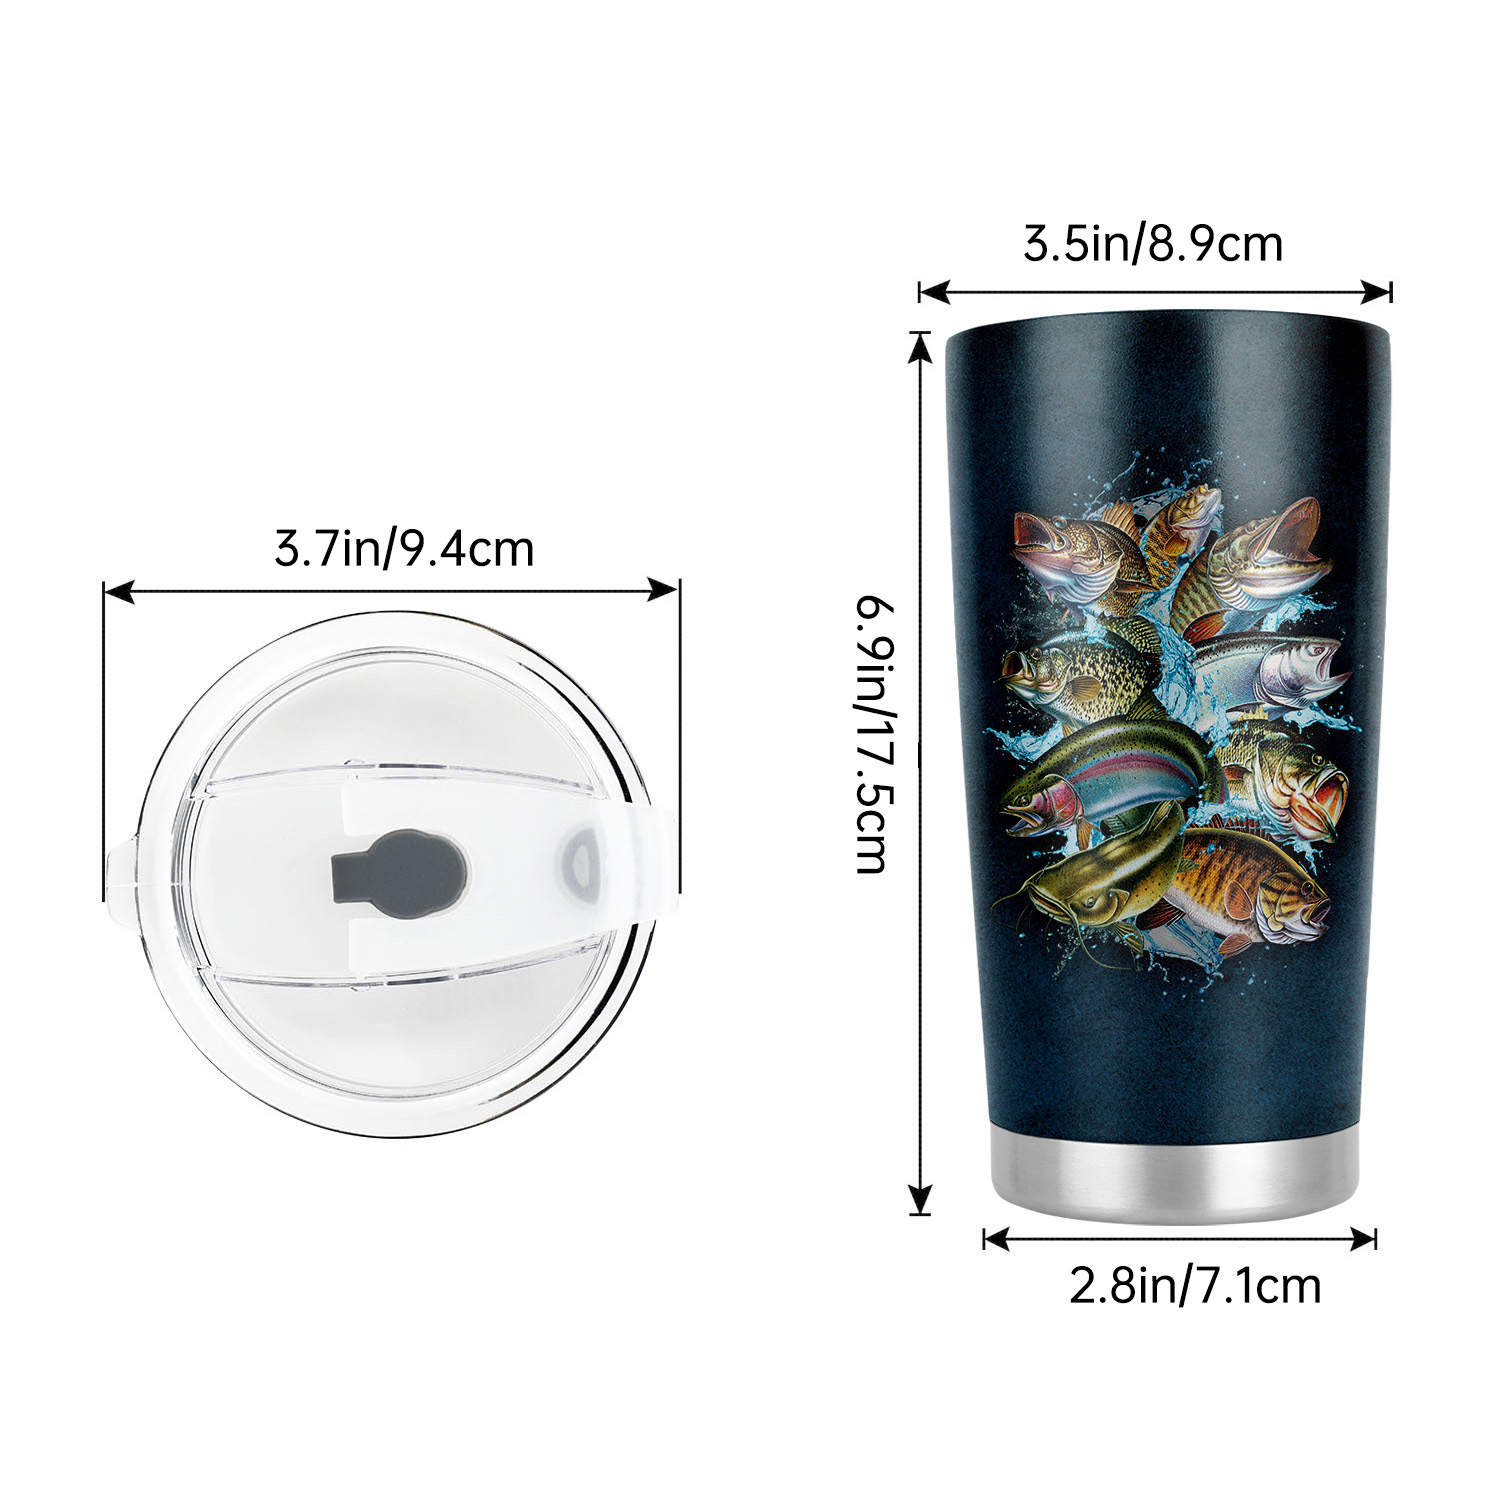 Hookers and Blow, Funny Fishing Gift Insulated Stainless Steel Tumbler -  Fishing Cup